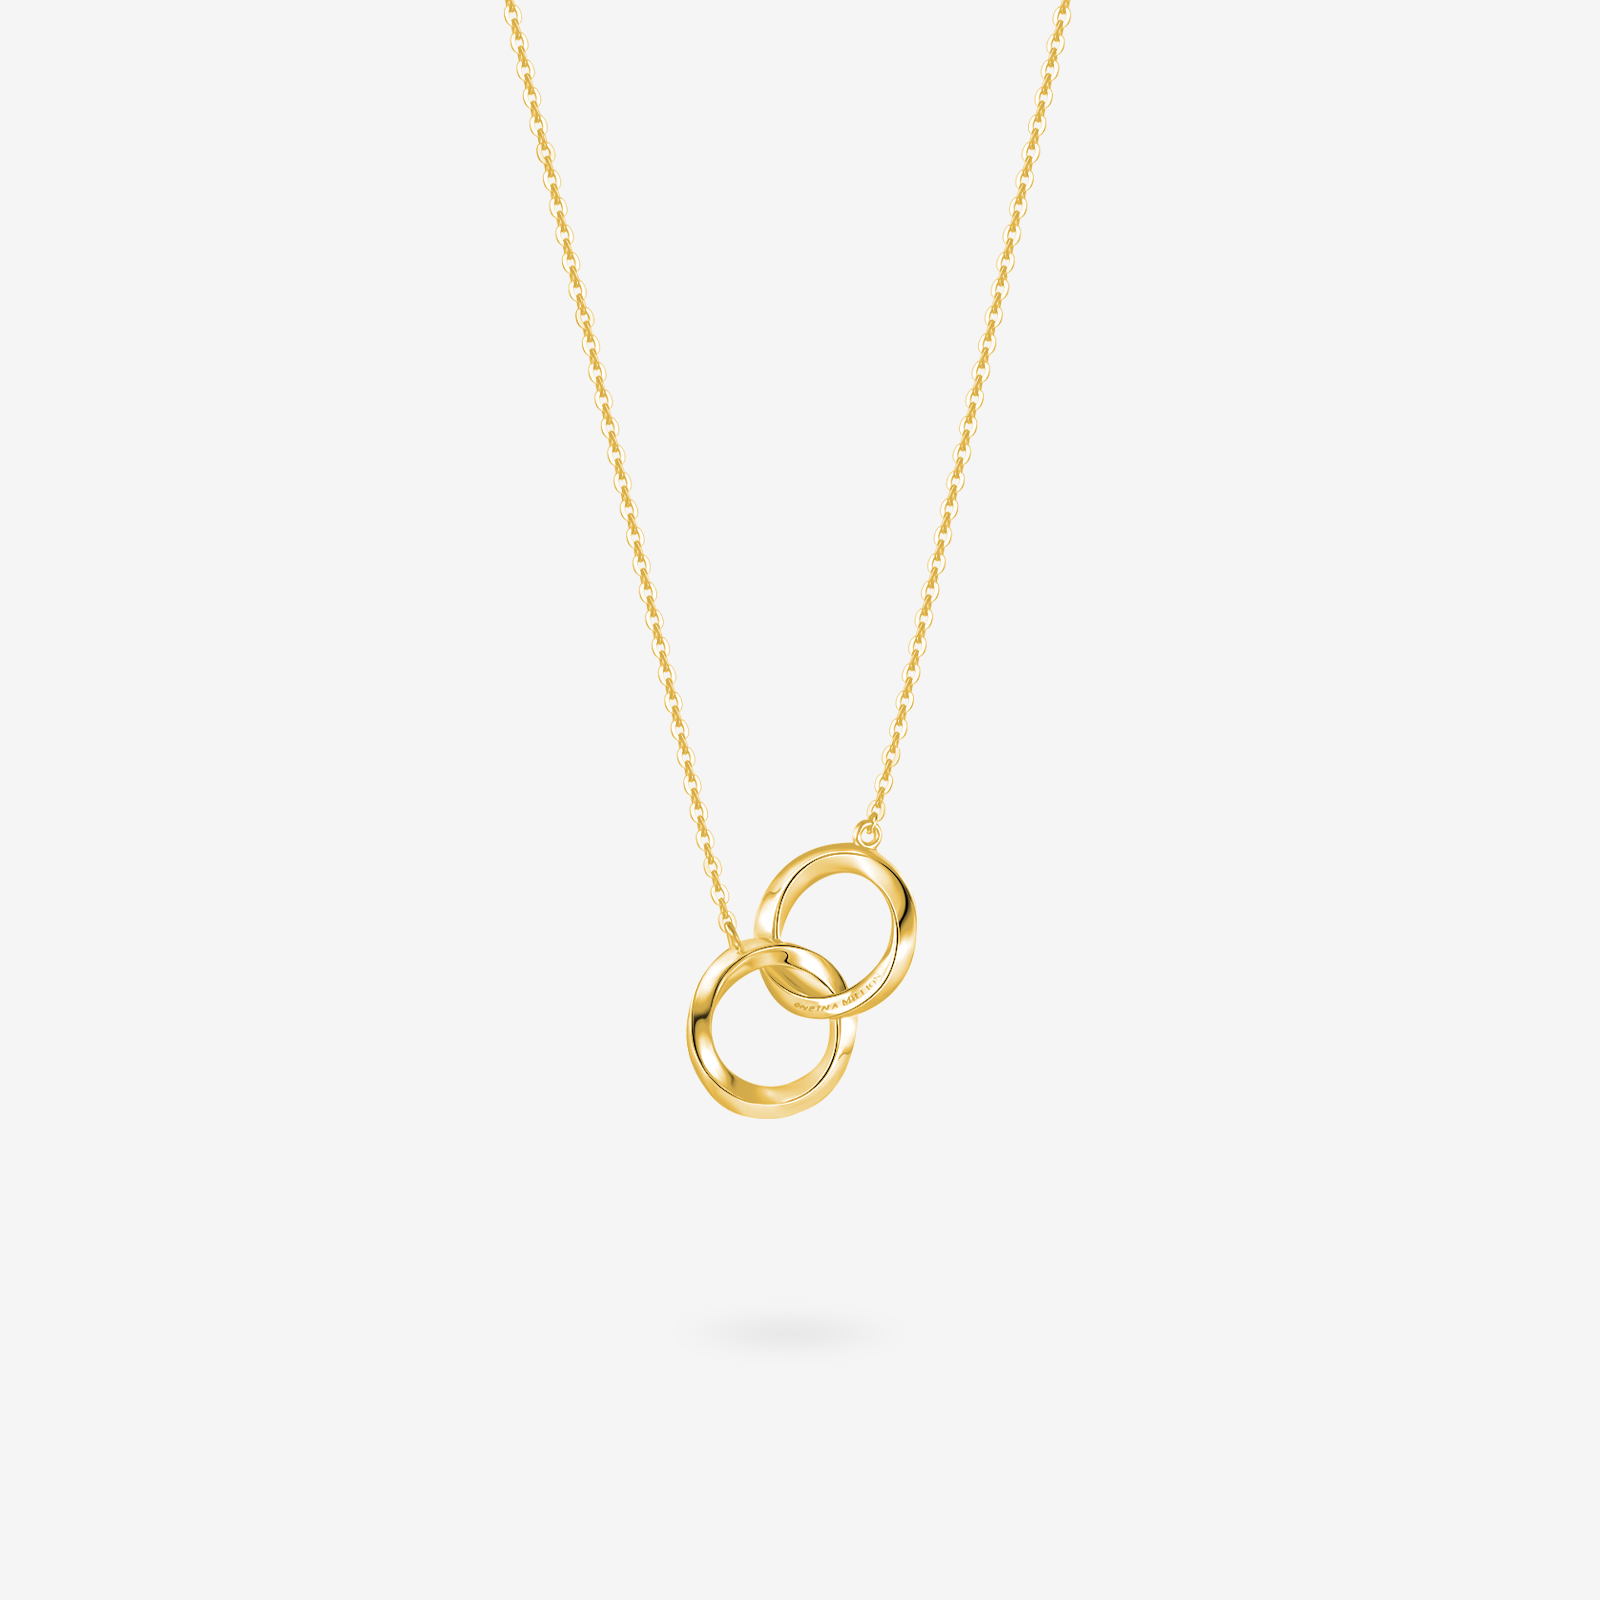 FANCIME "Connected" Mobius Matching Ring Sterling Silver Necklace